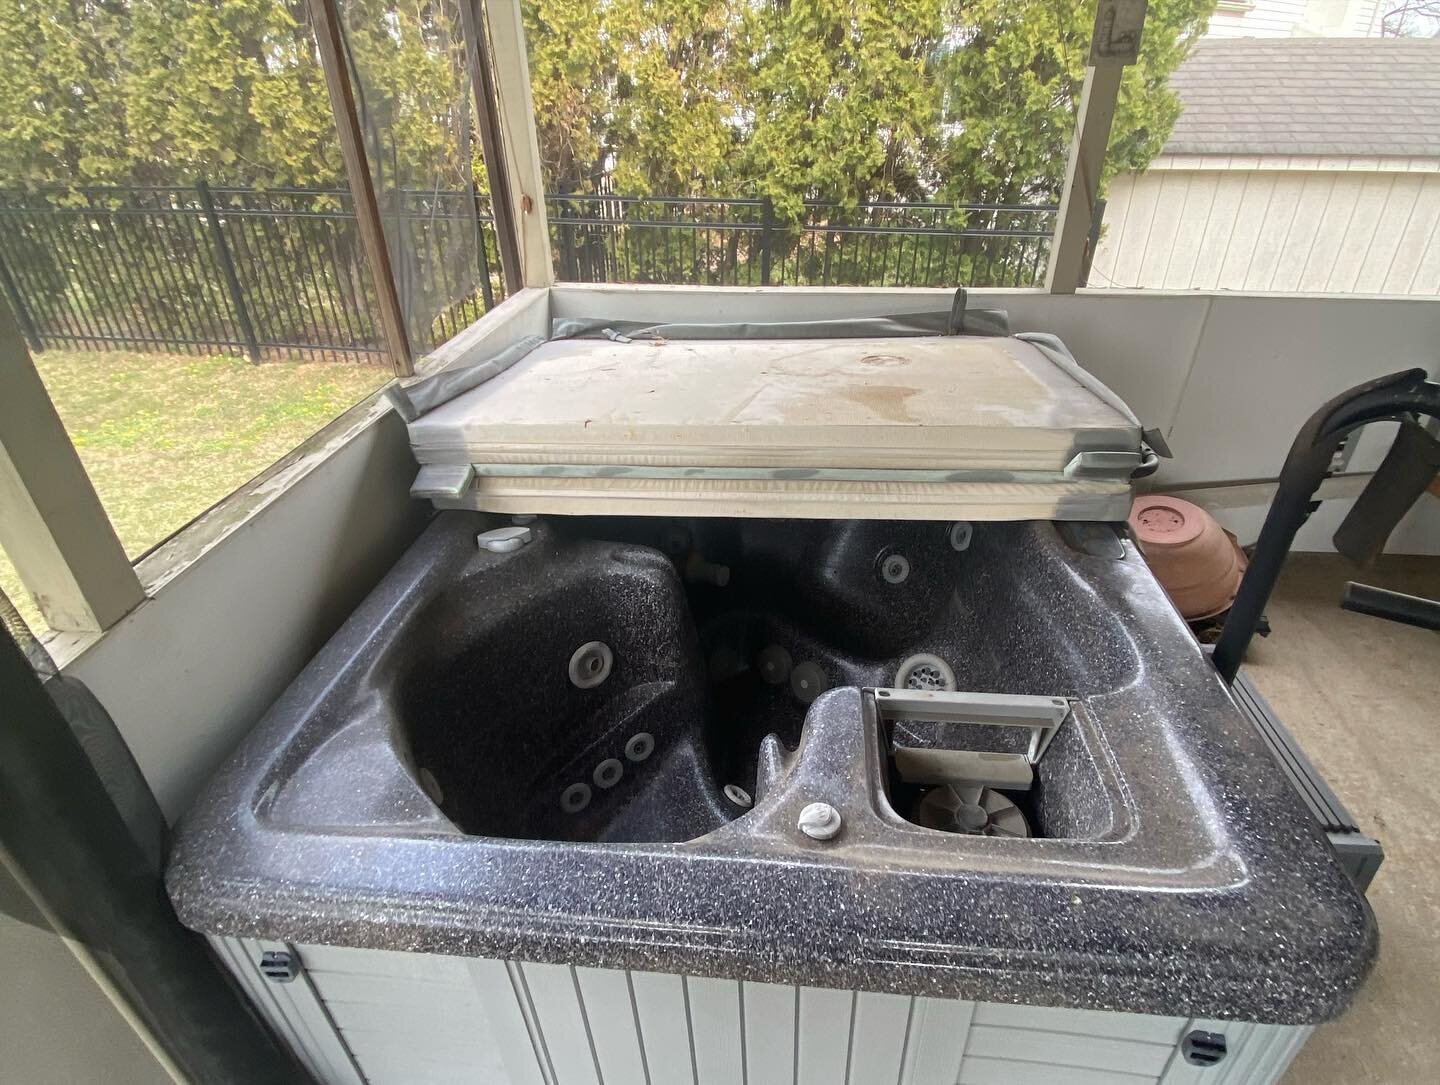 Sliced up and removed a 20-year old jacuzzi hot tub that was no longer working and taking up space. Thank you @sharimmediato for the referral. A great real estate agent servicing PA and DE. 

Call us today to and reclaim your space. We&rsquo;d love t